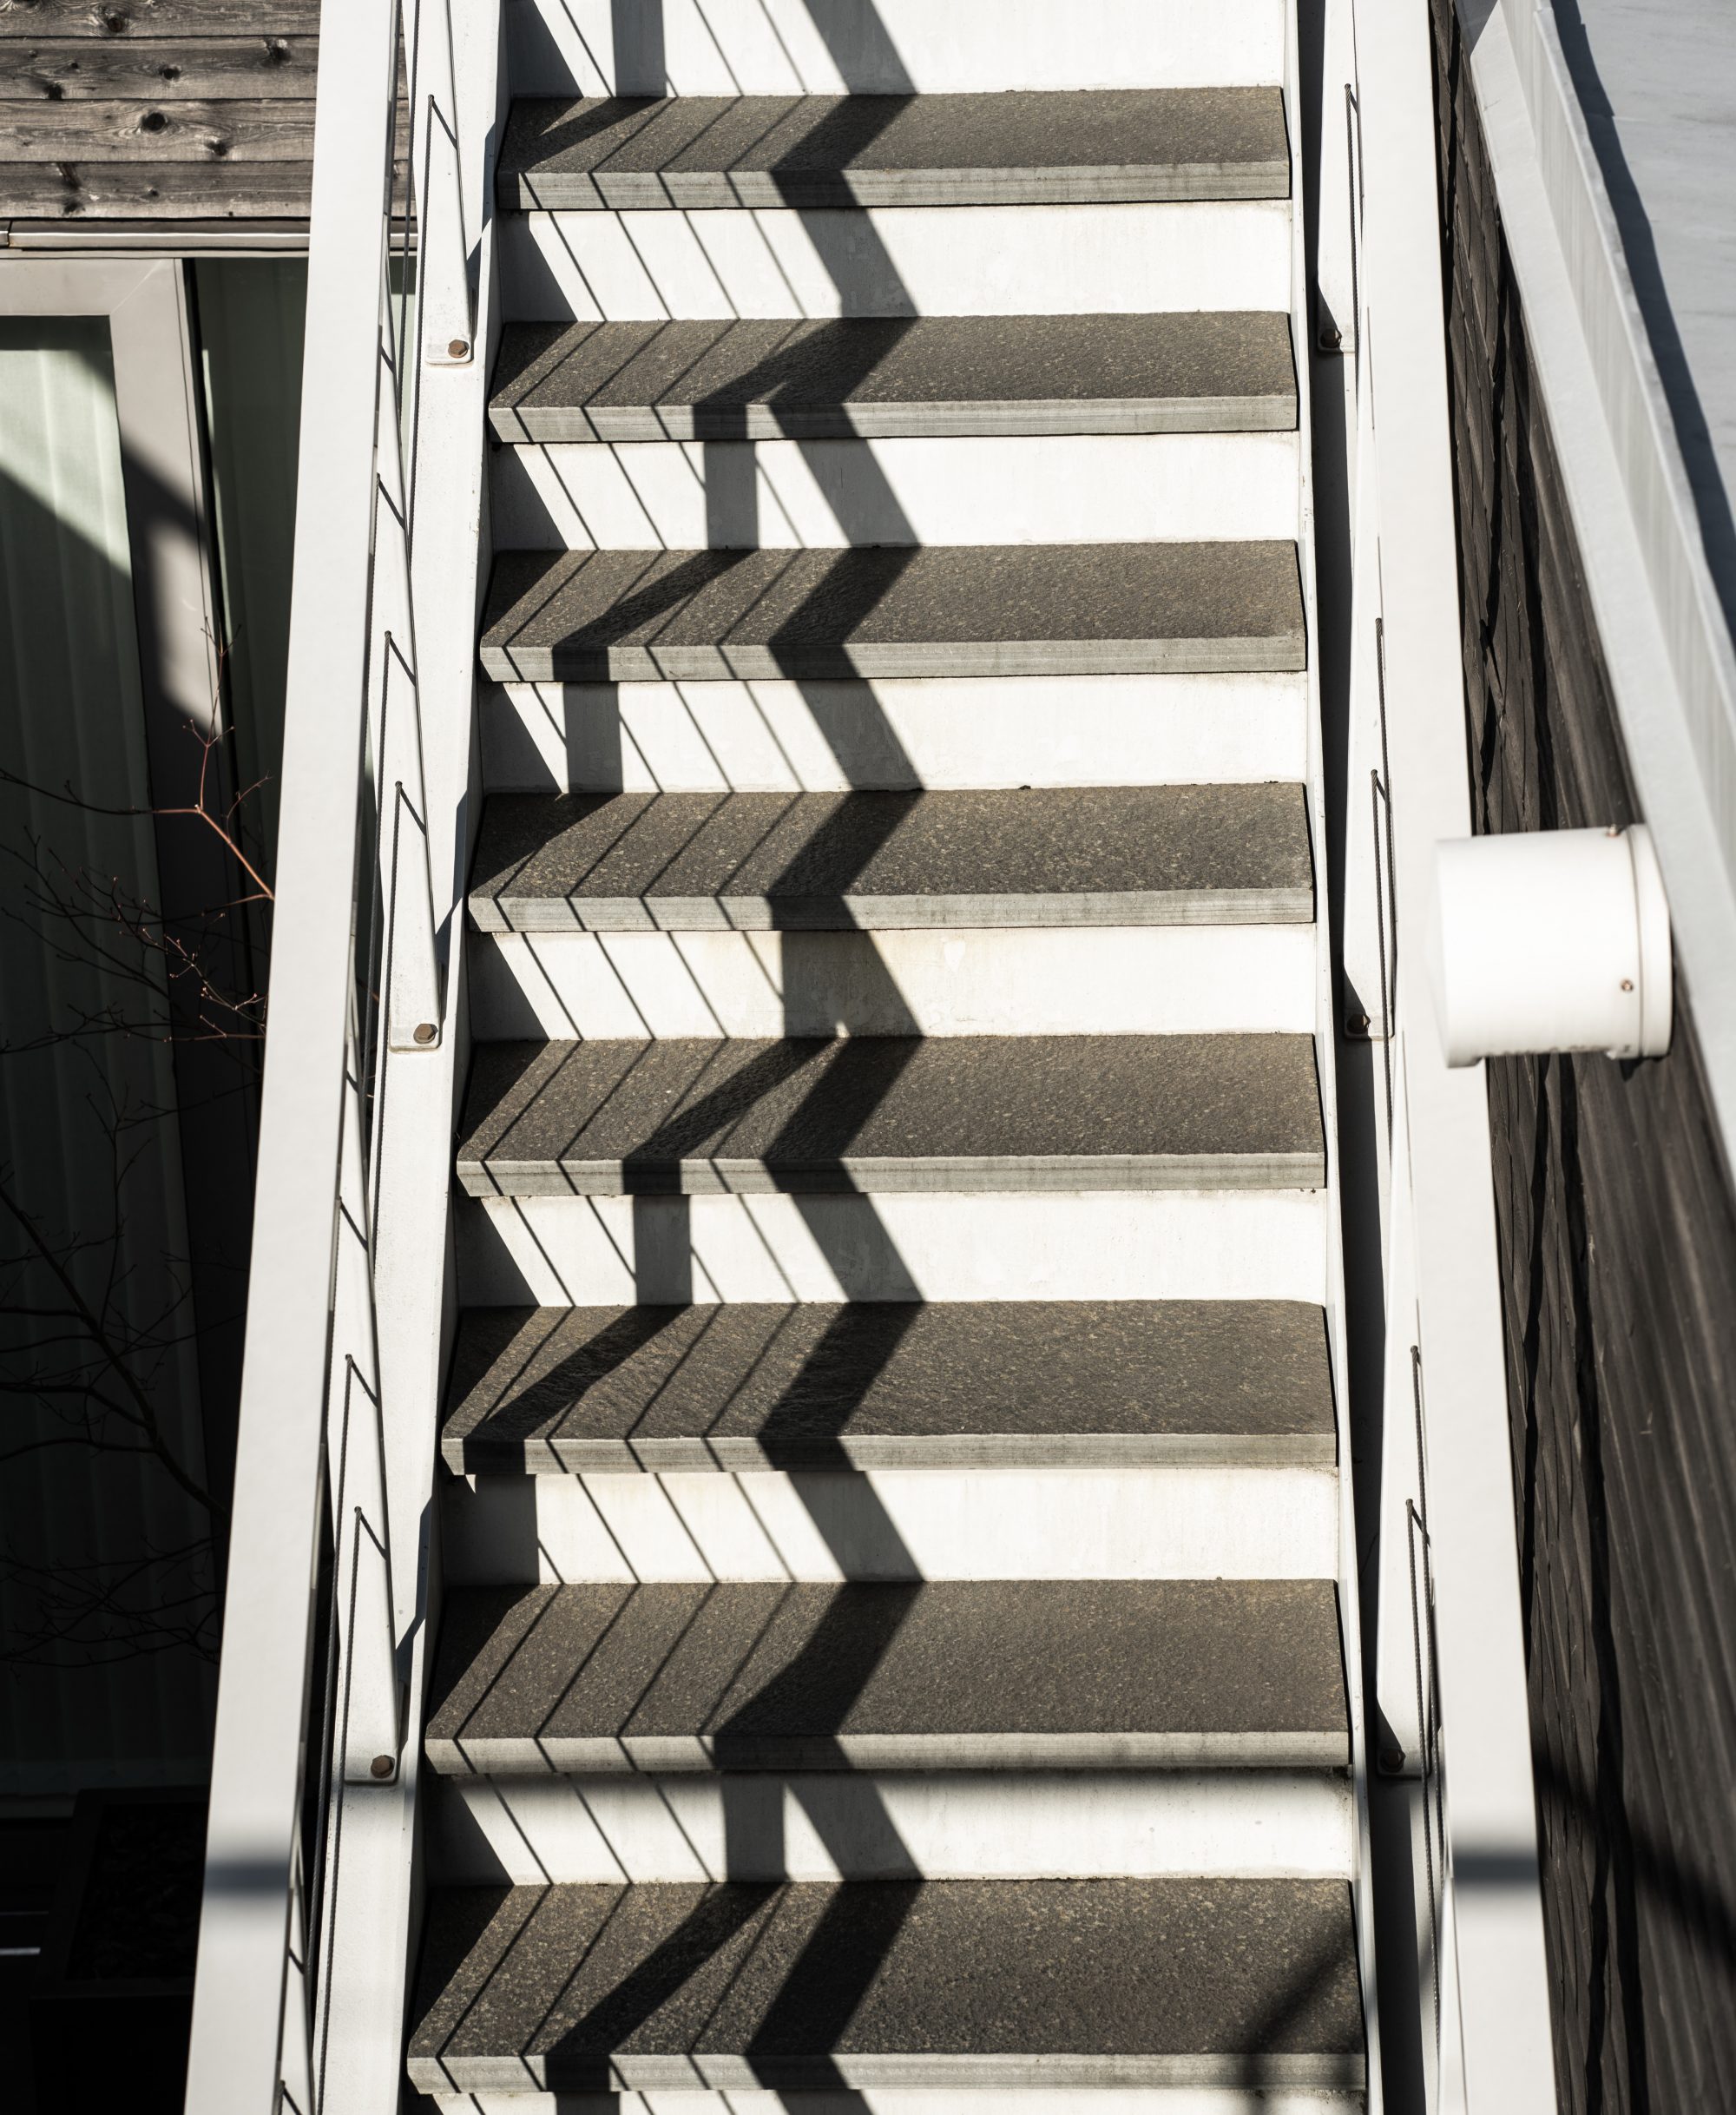 Stairs with shadows